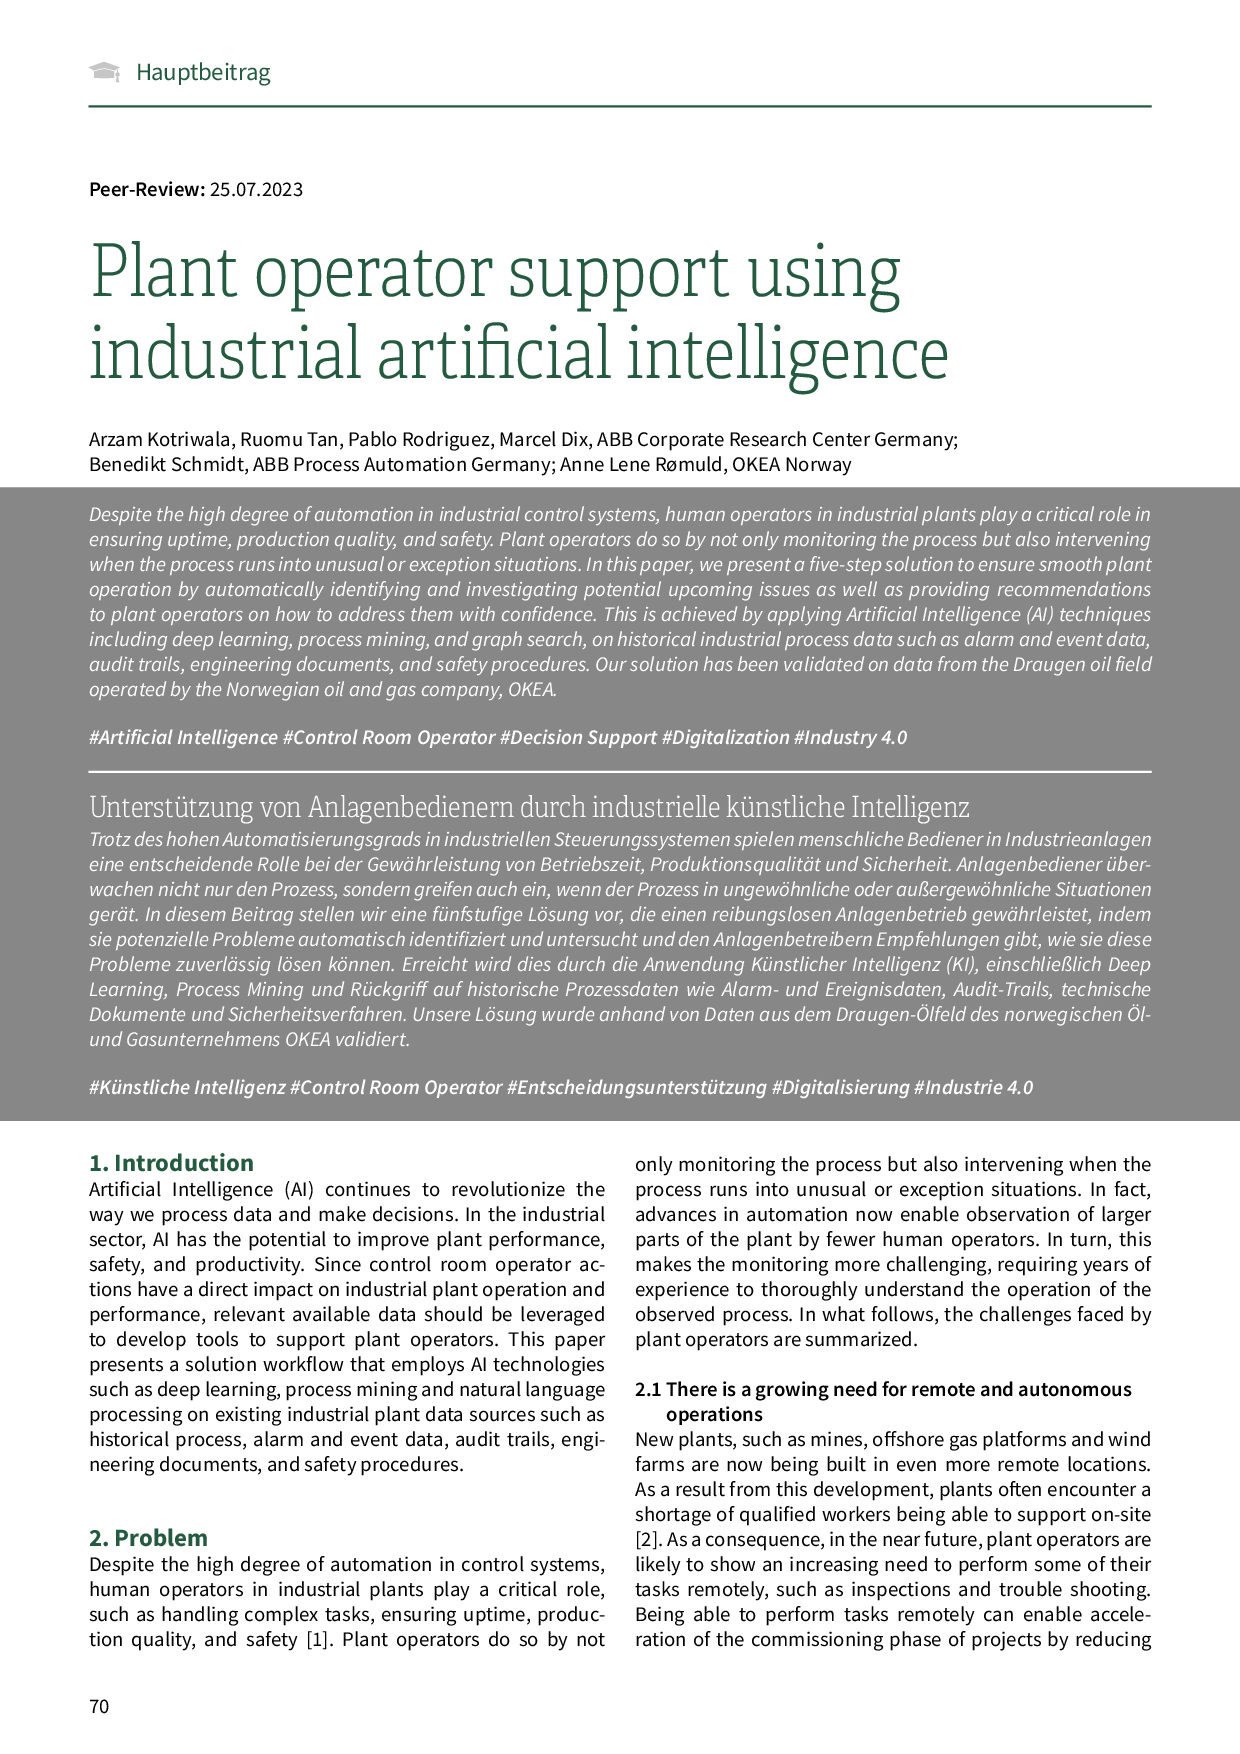 Plant operator support using industrial artificial intelligence